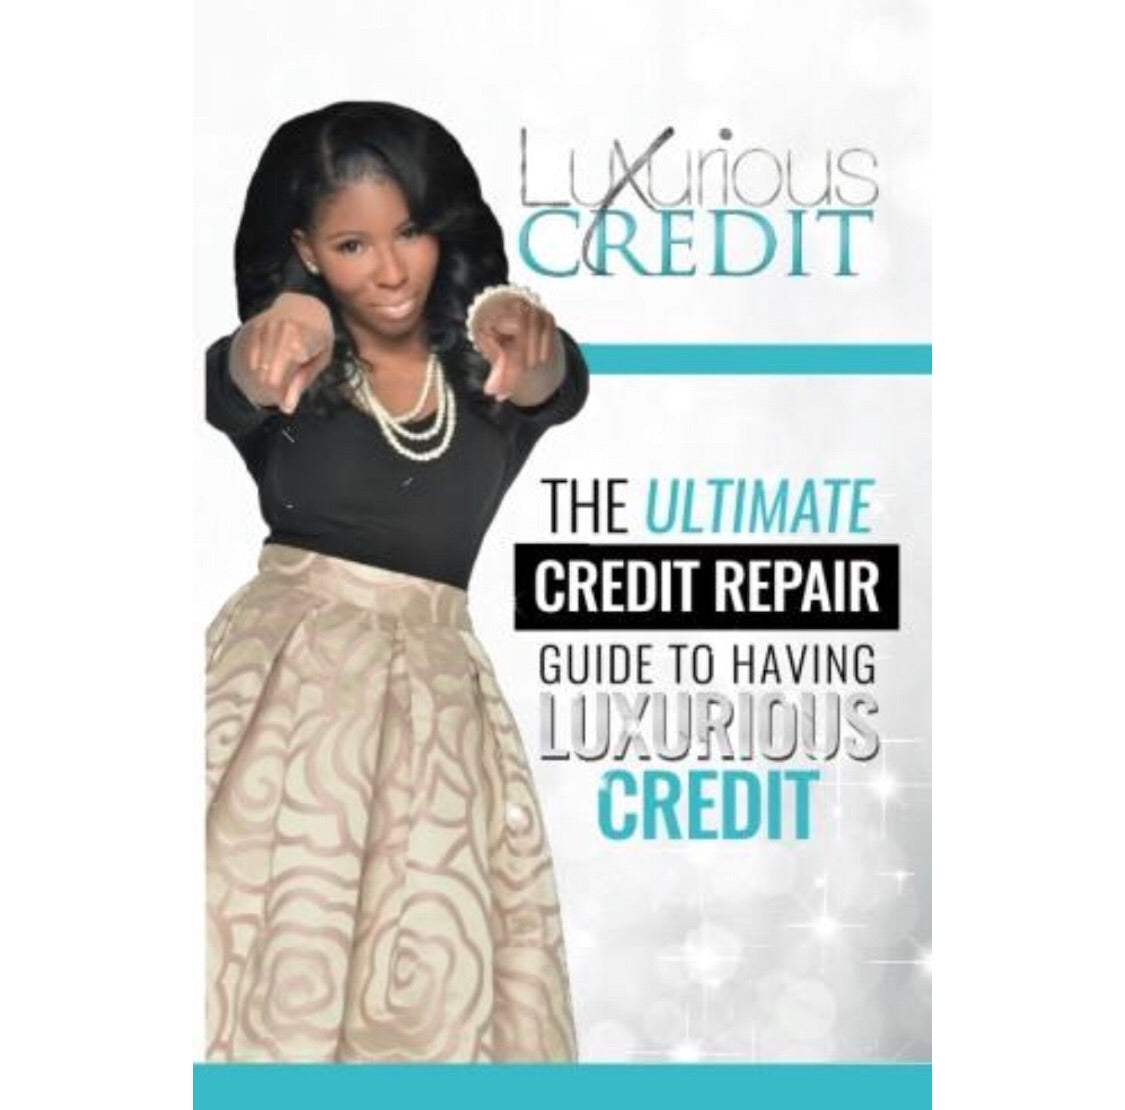 "The Ultimate Guide to Having Luxurious Credit"